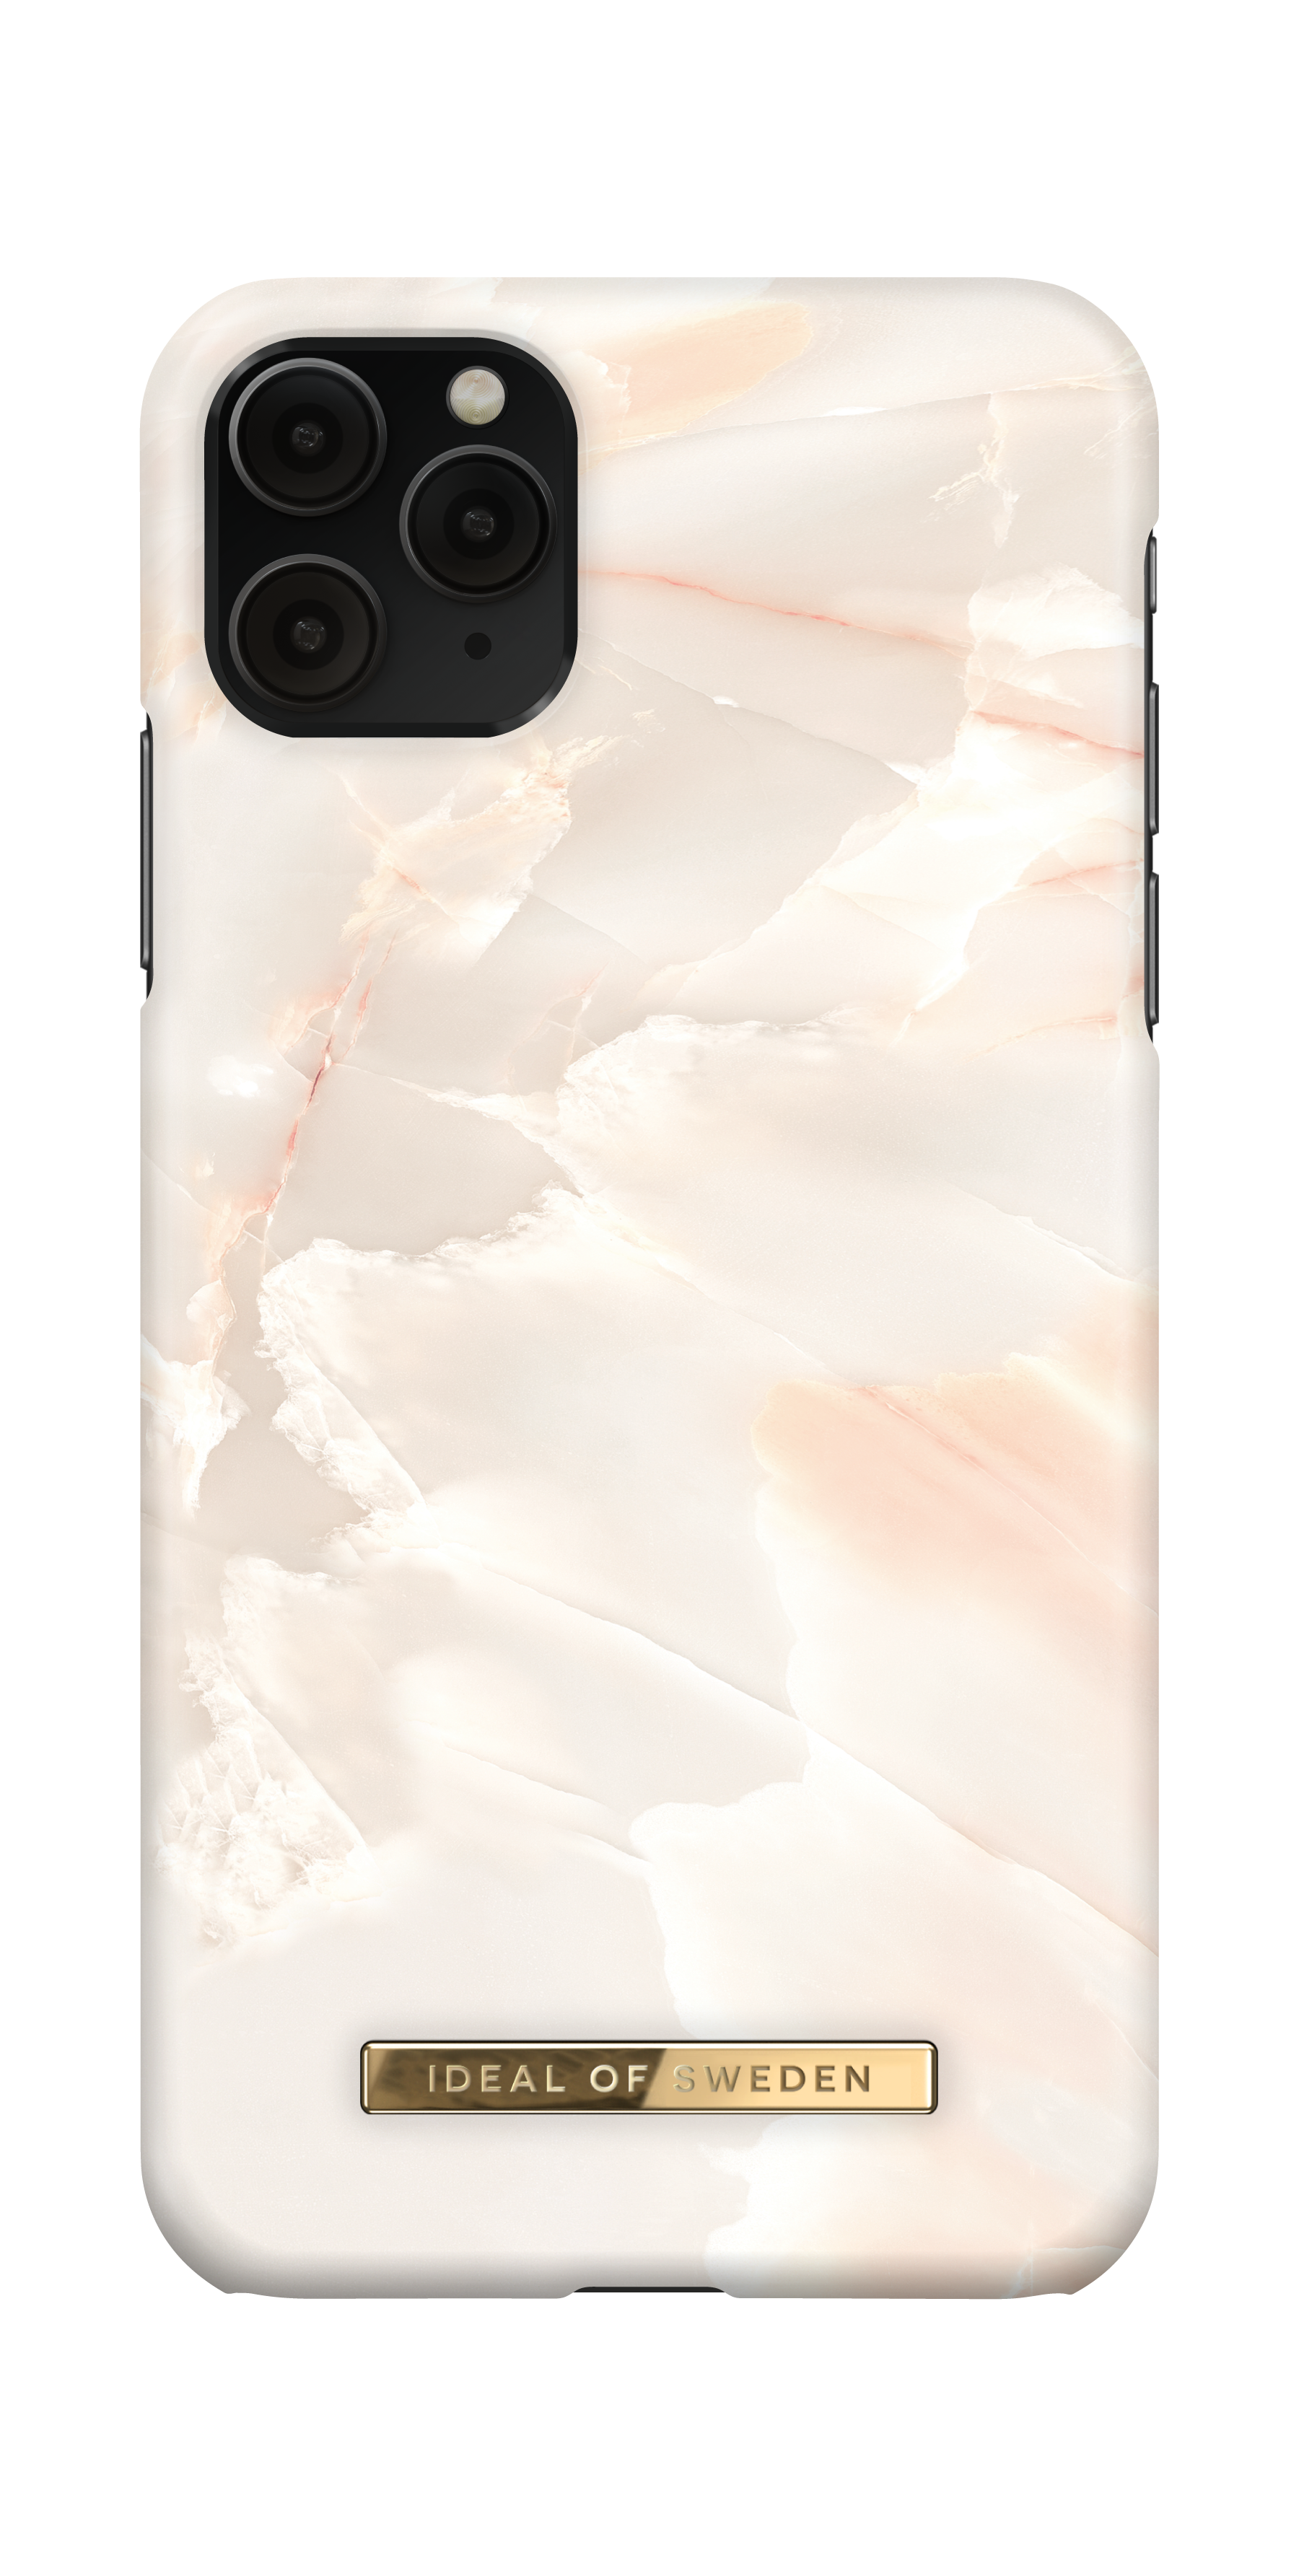 IDEAL OF SWEDEN XS Rose Backcover, Marble Apple, Max, Pro iPhone Pearl iPhone 11 IDFCSS21-I1965-257, Max